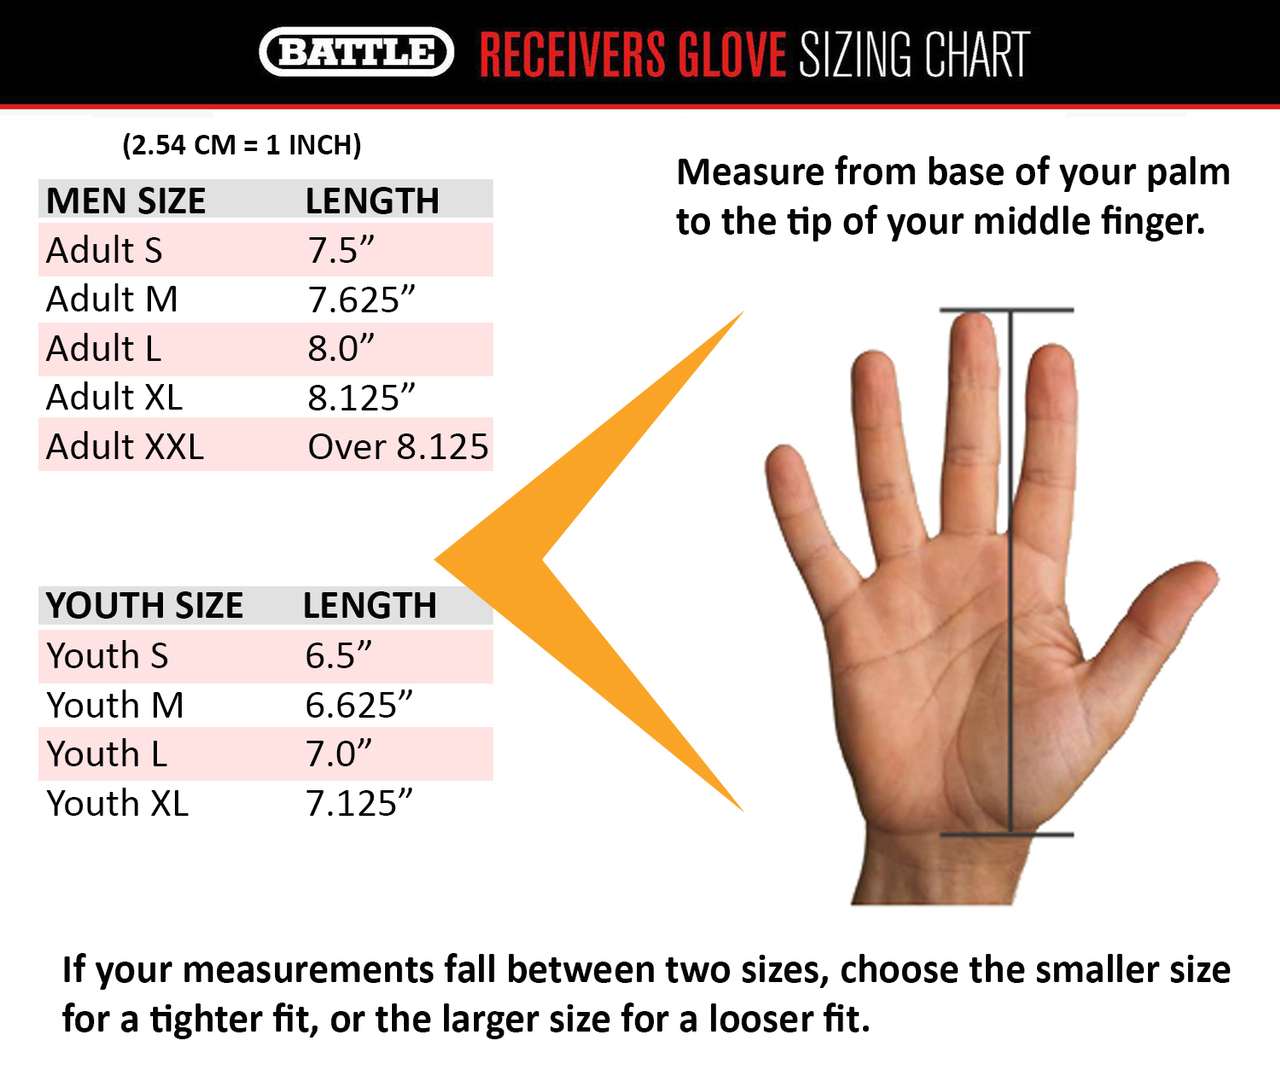 under armour youth football gloves size chart